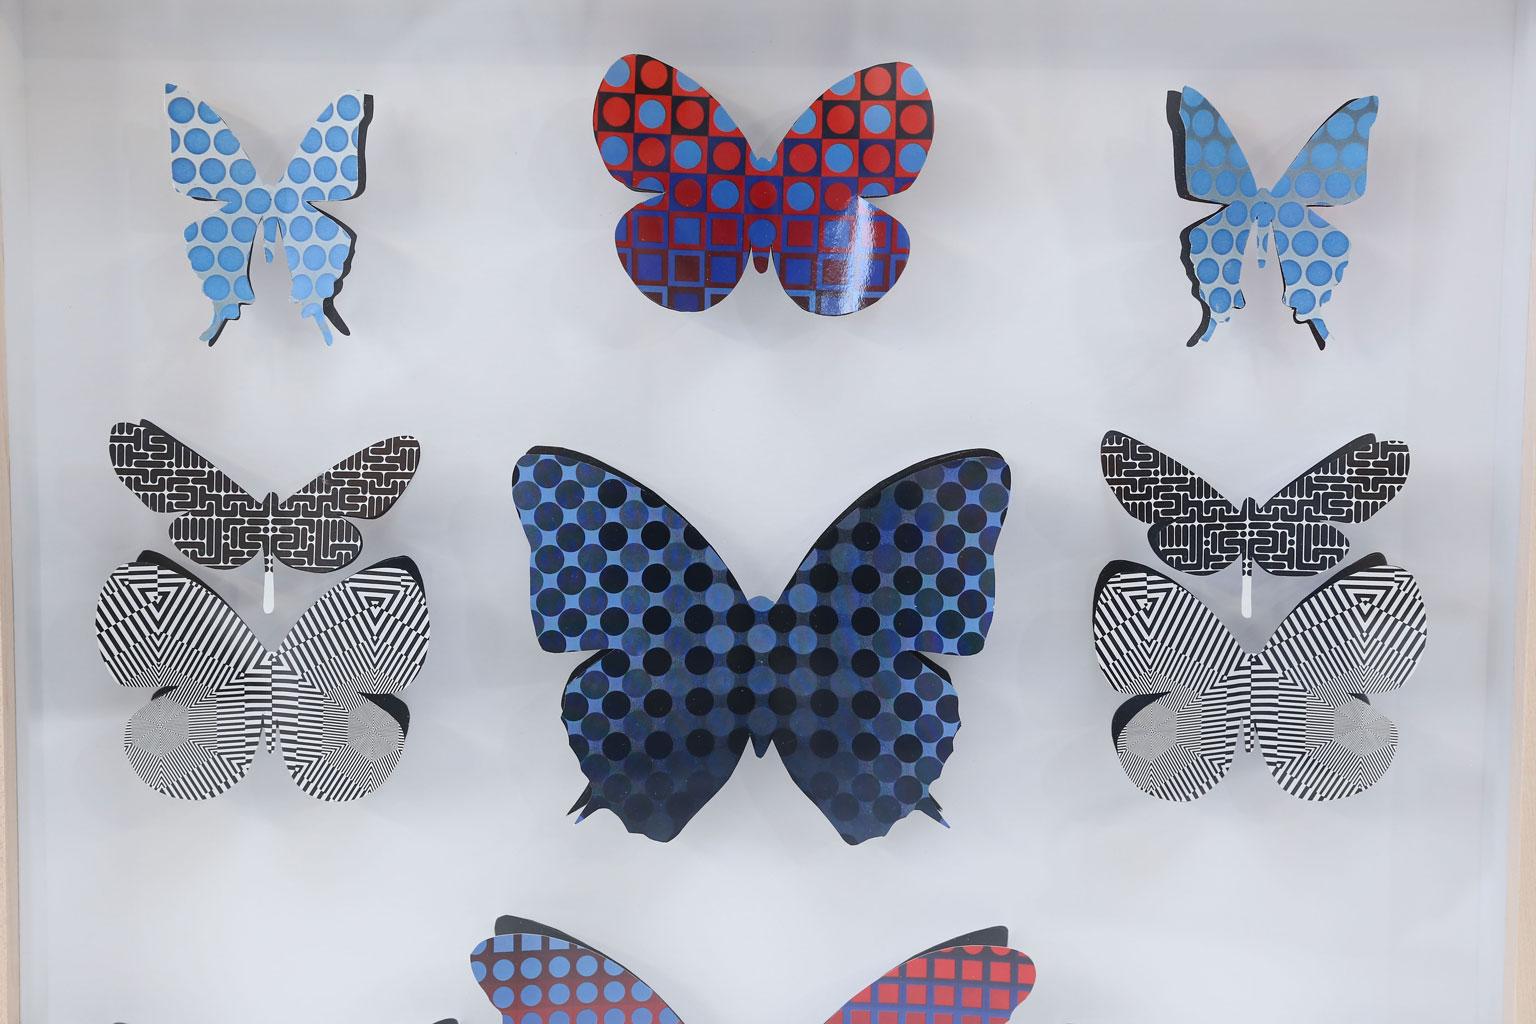 Op art butterfly box: vintage (circa 1960-1979) Op art handcut into butterfly shapes and pinned within a shadow box as specimen. Framed in unfinished maple. Two more similar pieces available (ref: LU98471691135 and LU984716911321).